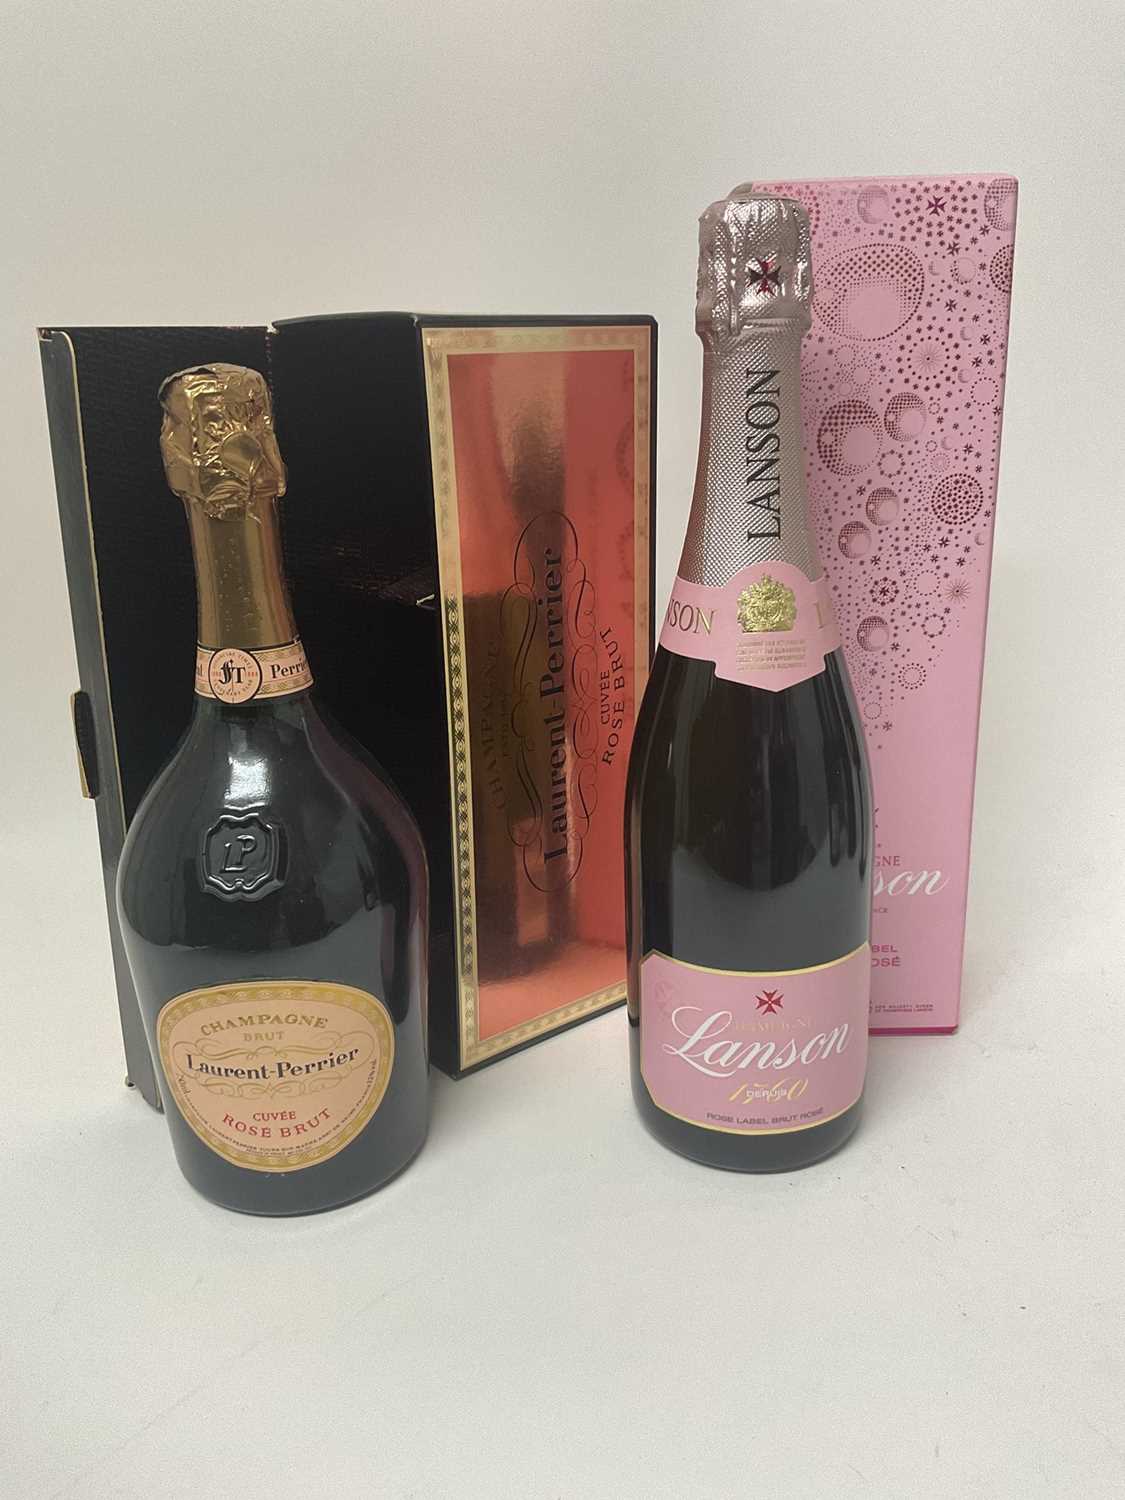 Lot 46 - Two bottle s of champagne to include Laurent-Perrier Cuvée Rosé Brut in box, and Lanson Brut Rosé Champagne in box